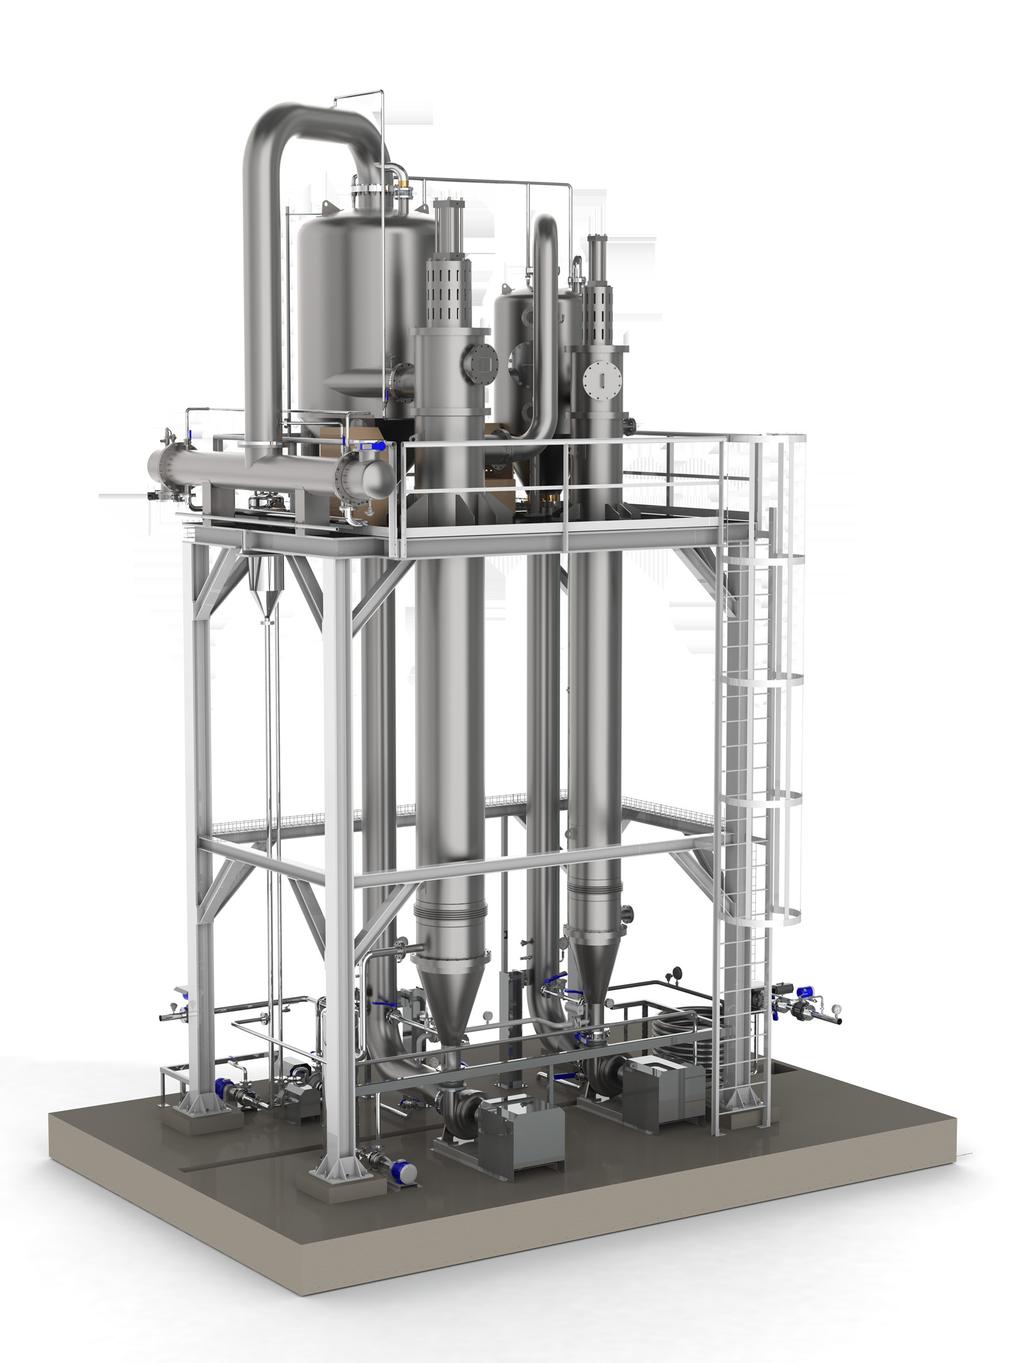 HRS Heat Exchangers provide a range of heat exchangers, components, modules and complete processing systems that help you to optimise production, make the most of raw materials, whilst reducing